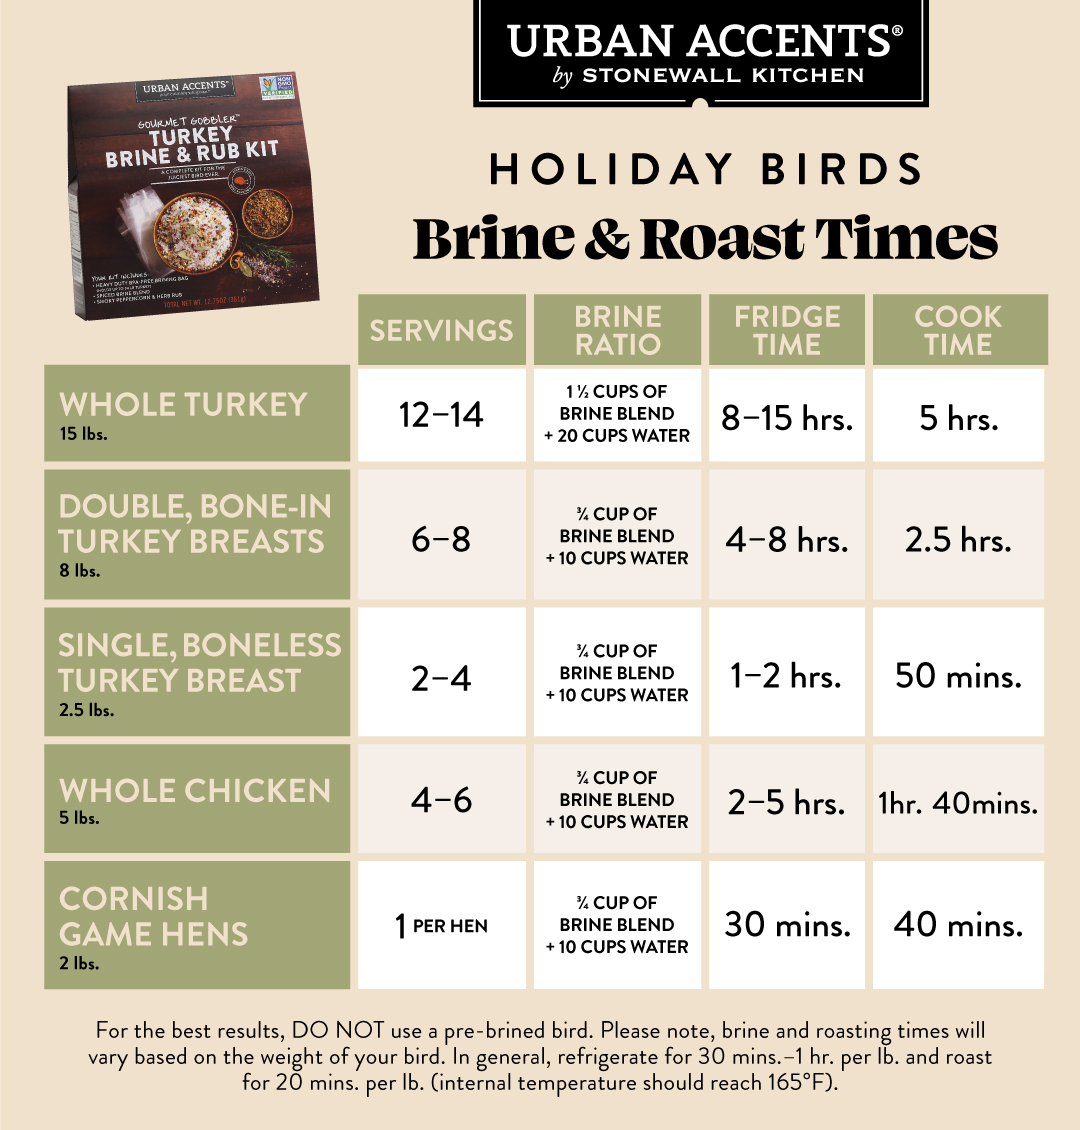 Urban Accents by Stonewall Kitchen; Holiday Birds Brine & Roast Times; Whole Turkey (15 lbs.): 12-14 servings, 1.5 cups of brine blend + 20 cups water, 8-15 hours fridge time, 5 hours cook time; Double, Bone-In Turkey Breasts (8 lbs.): 6-8 servings, .75 cup of brine blend + 10 cups water, 4-8 hours fridge time, 2.5 hours cook time; Single, Boneless Turkey Breast (2.5 lbs.): 2-4 servings, .75 cup of brine blend + 10 cups water, 1-2 hours fridge time, 50 minutes cook time; Whole Chicken (5 lbs.): 4-6 servings, .75 cups of brine blend, 2-5 hours fridge time, 1 hour 40 minutes cook time; Cornish Game Hens (2 lbs.): 1 serving per hen, .75 cup of brine blend + 10 cups water, 30 minutes fridge time, 40 minutes cook time; For the best results, DO NOT use a pre-brined bird. Please note, brine and roasting times will vary based on the weight of your bird. In general, refrigerate for 30 minutes to 1 hour per pound and roast for 20 minutes per pound (internal temperature should reach 165 degrees Fahrenheit).